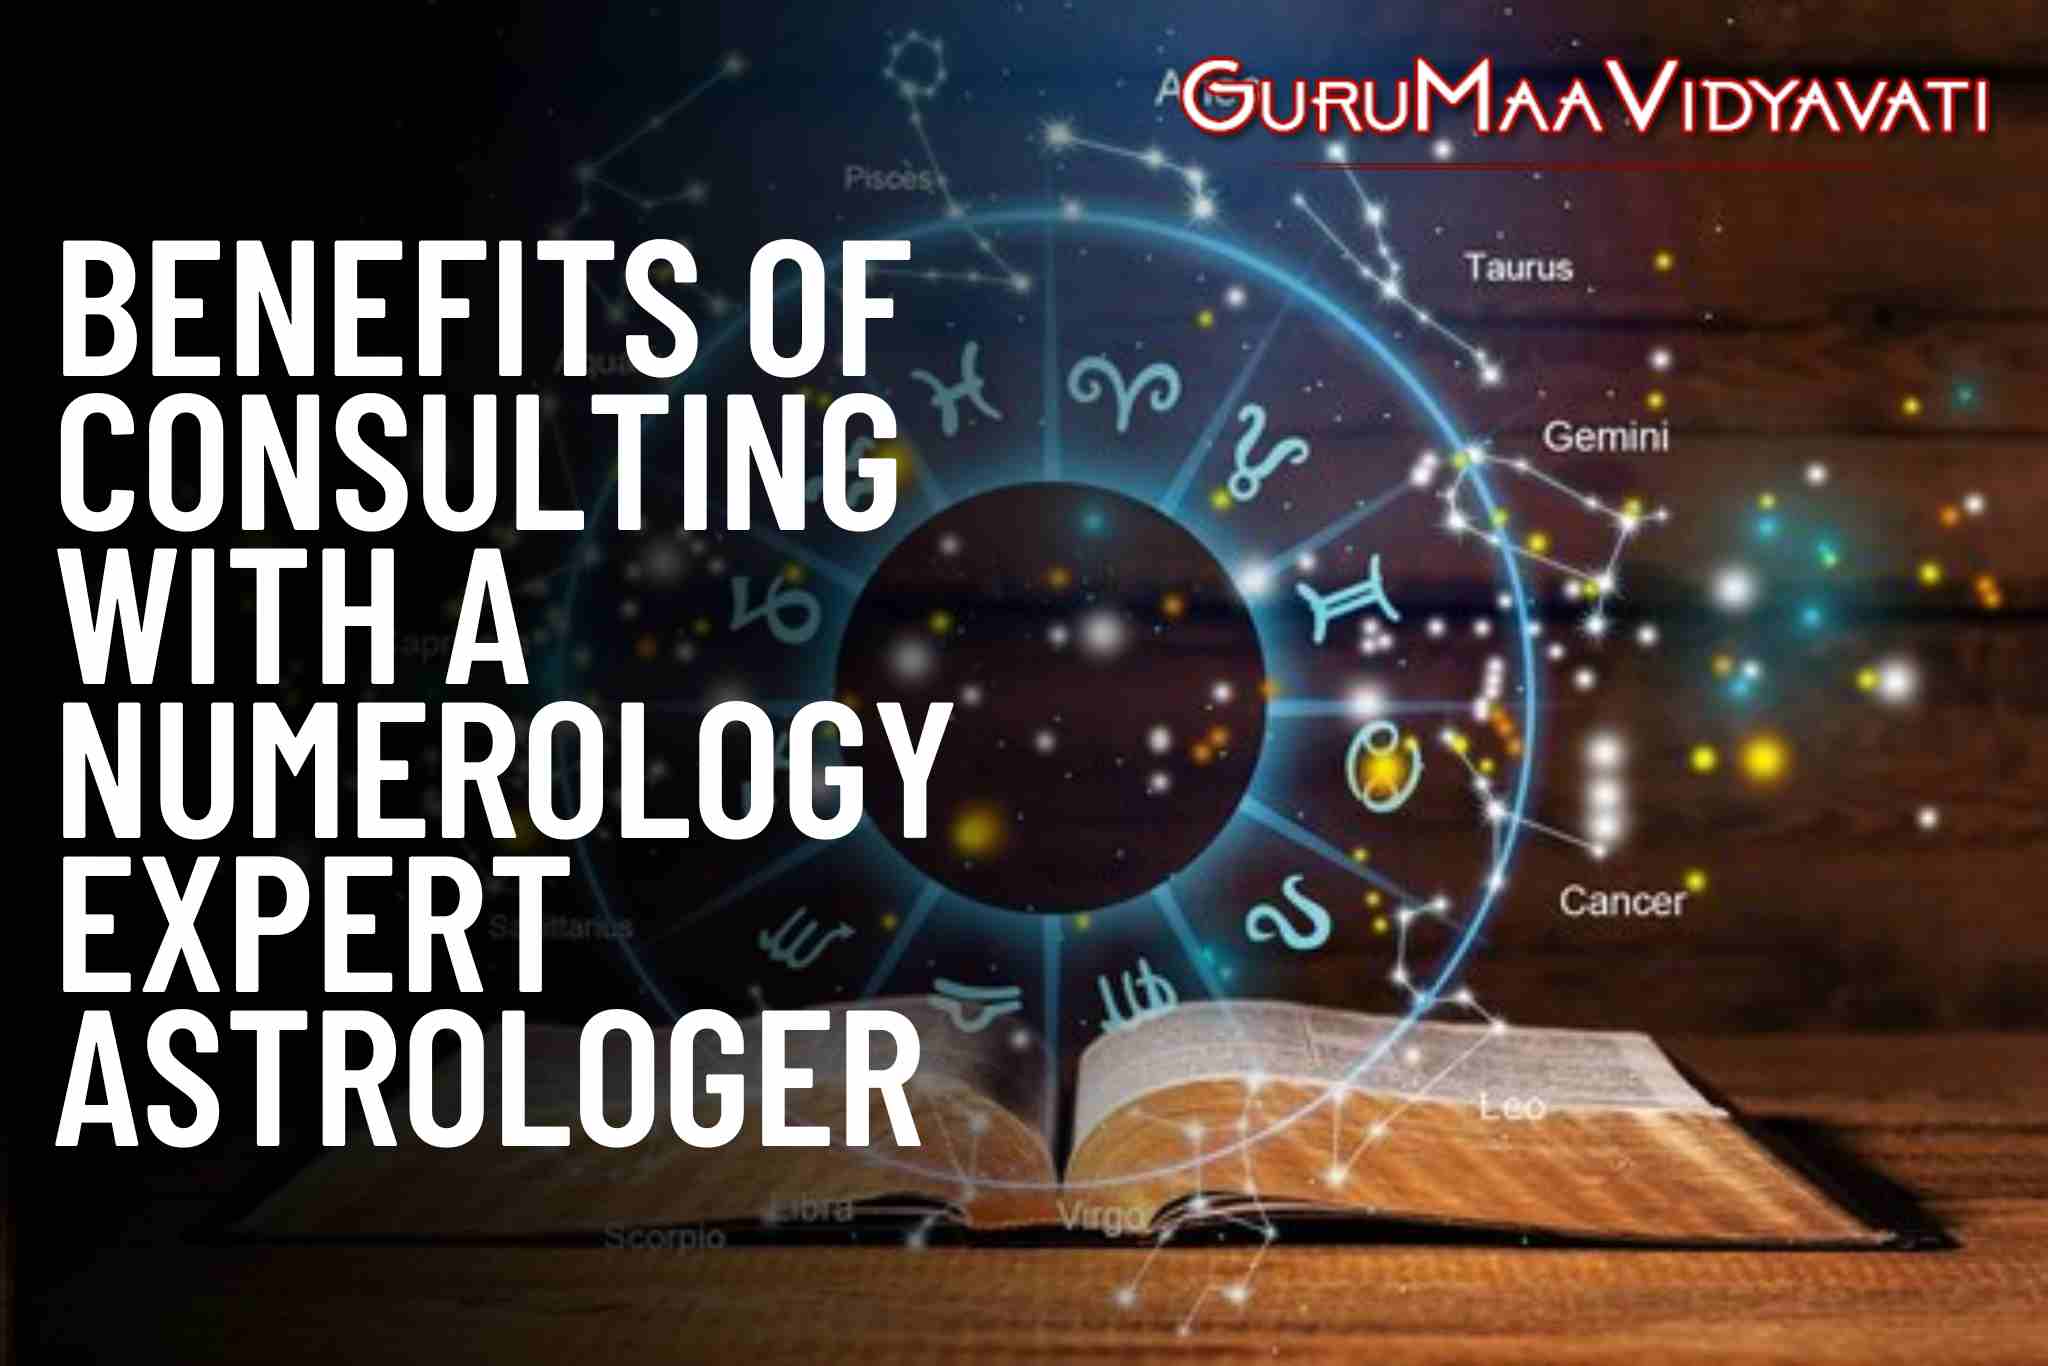 5 Benefits of Consulting with a Numerology Expert Astrologer